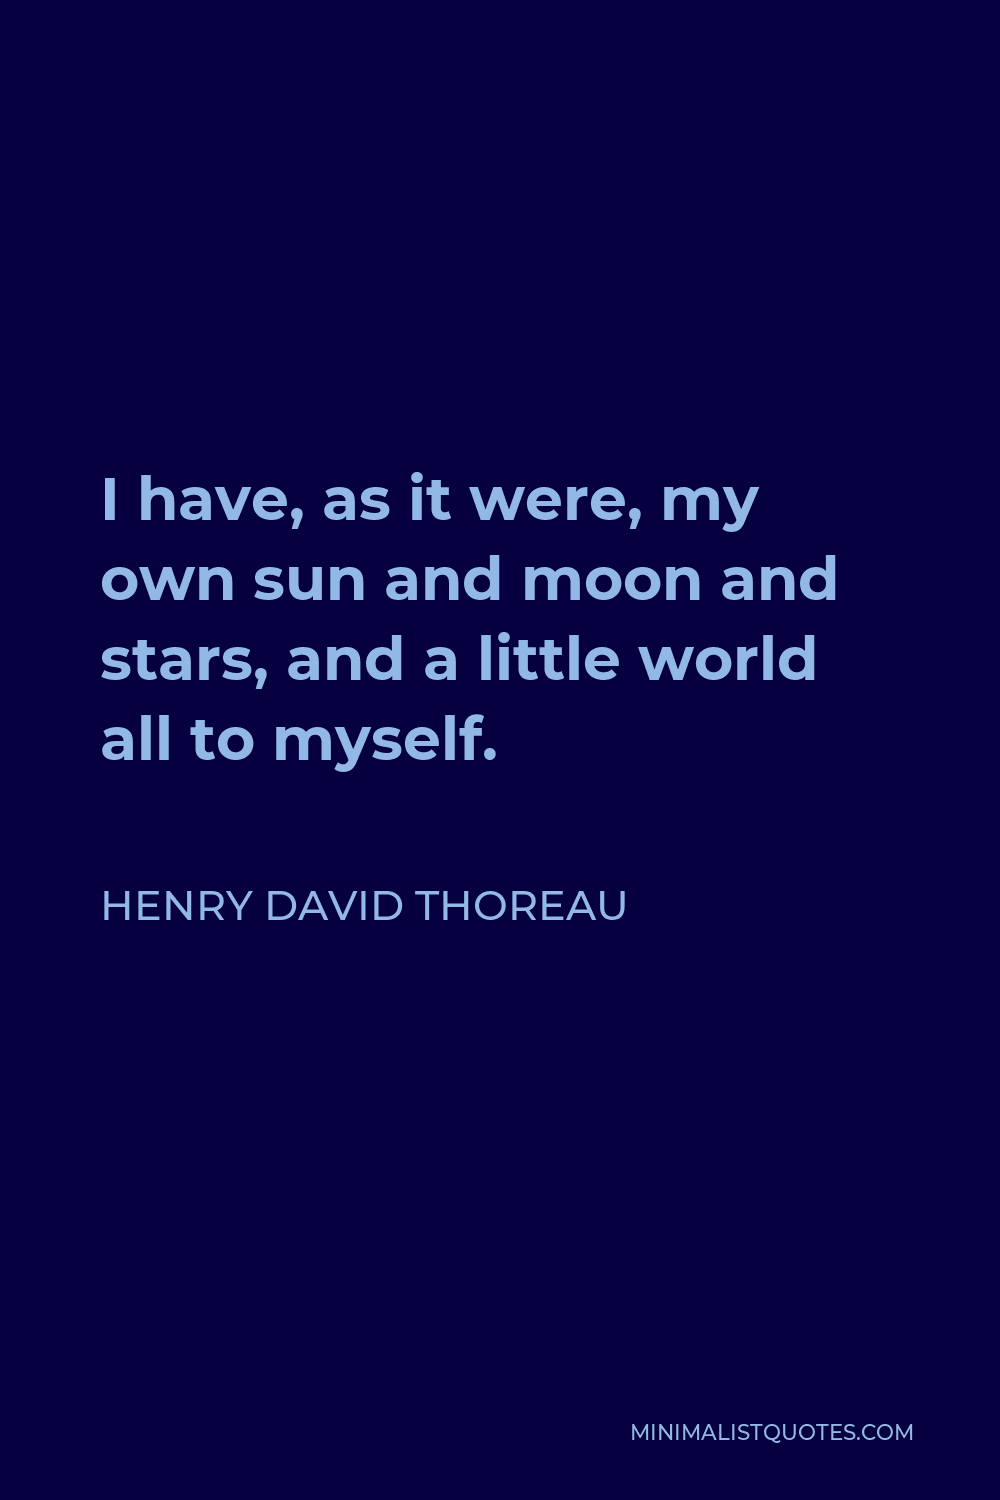 Henry David Thoreau Quote - I have, as it were, my own sun and moon and stars, and a little world all to myself.